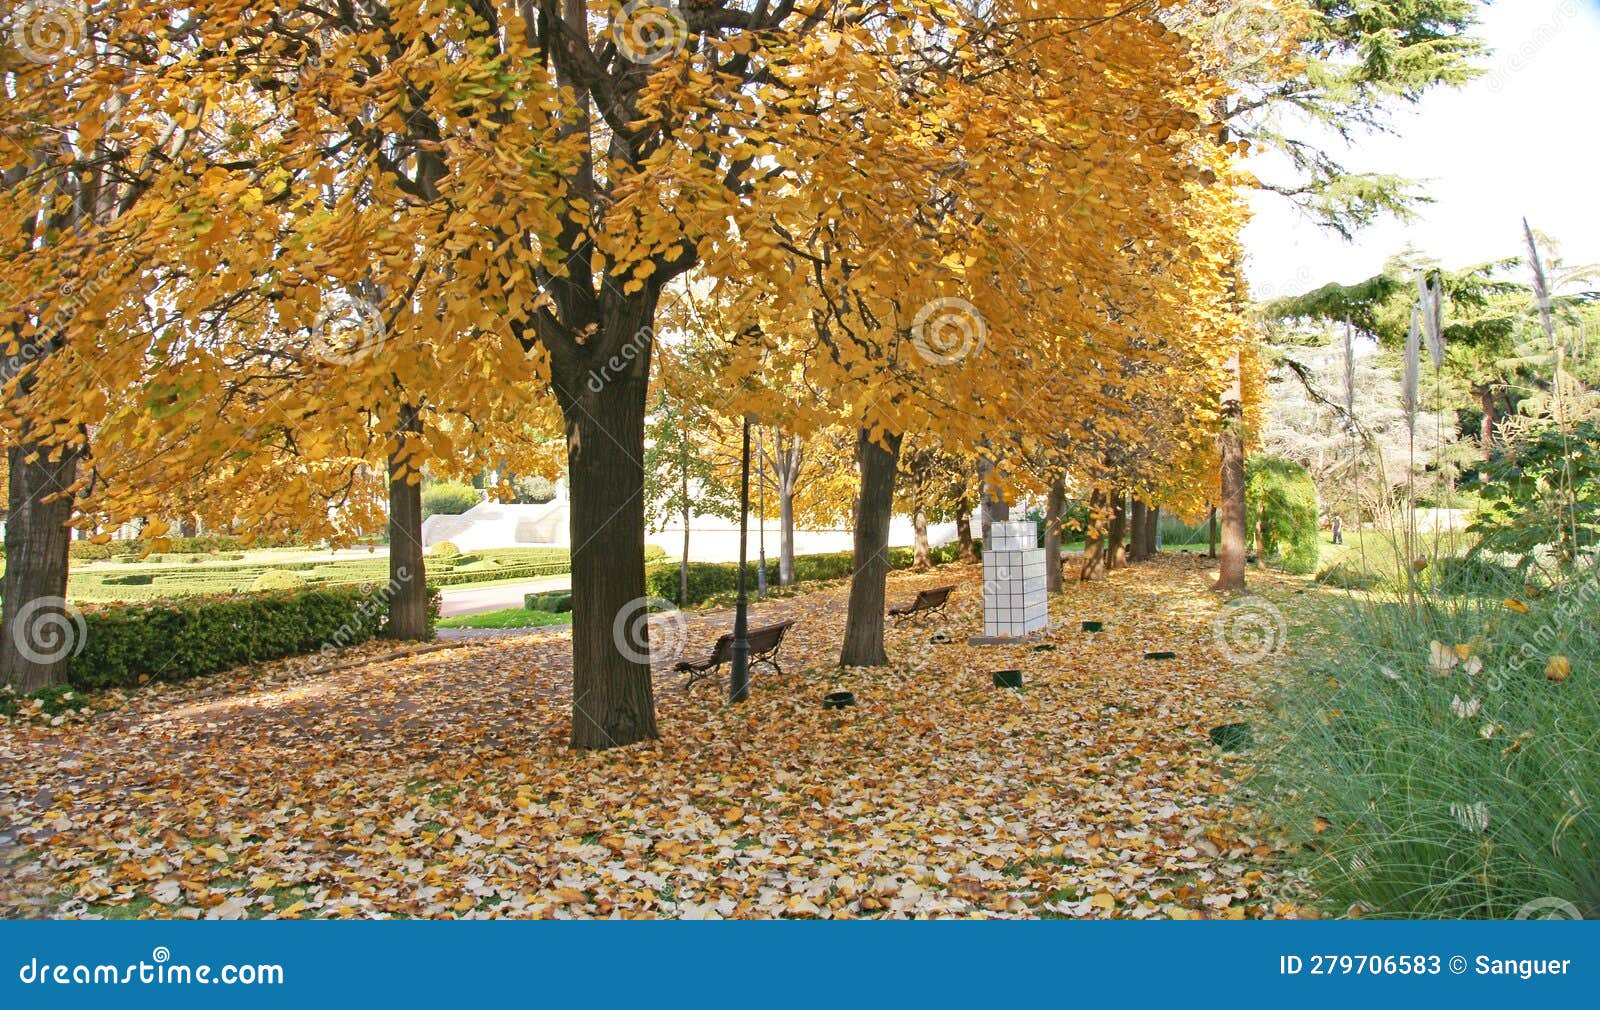 falling leaves in the gardens of the palacete de albeniz on montjuic mountain, barcelona